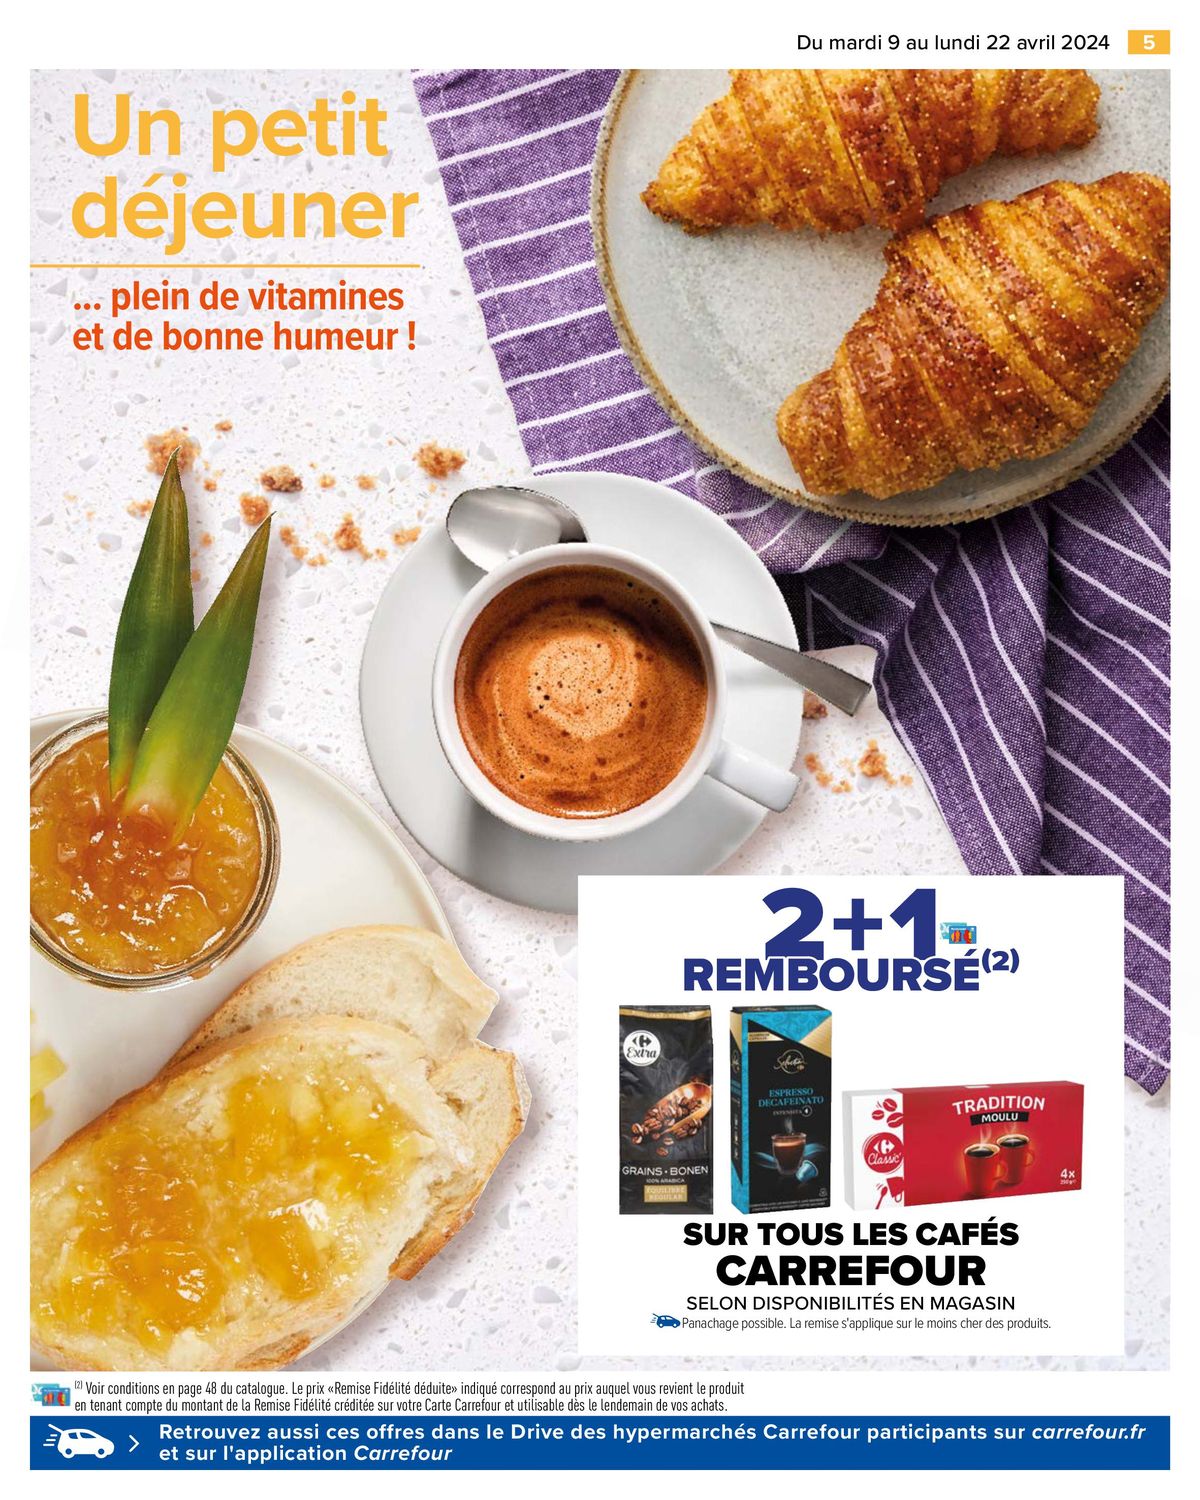 Catalogue OFFERT Carrefour Drive , page 00007